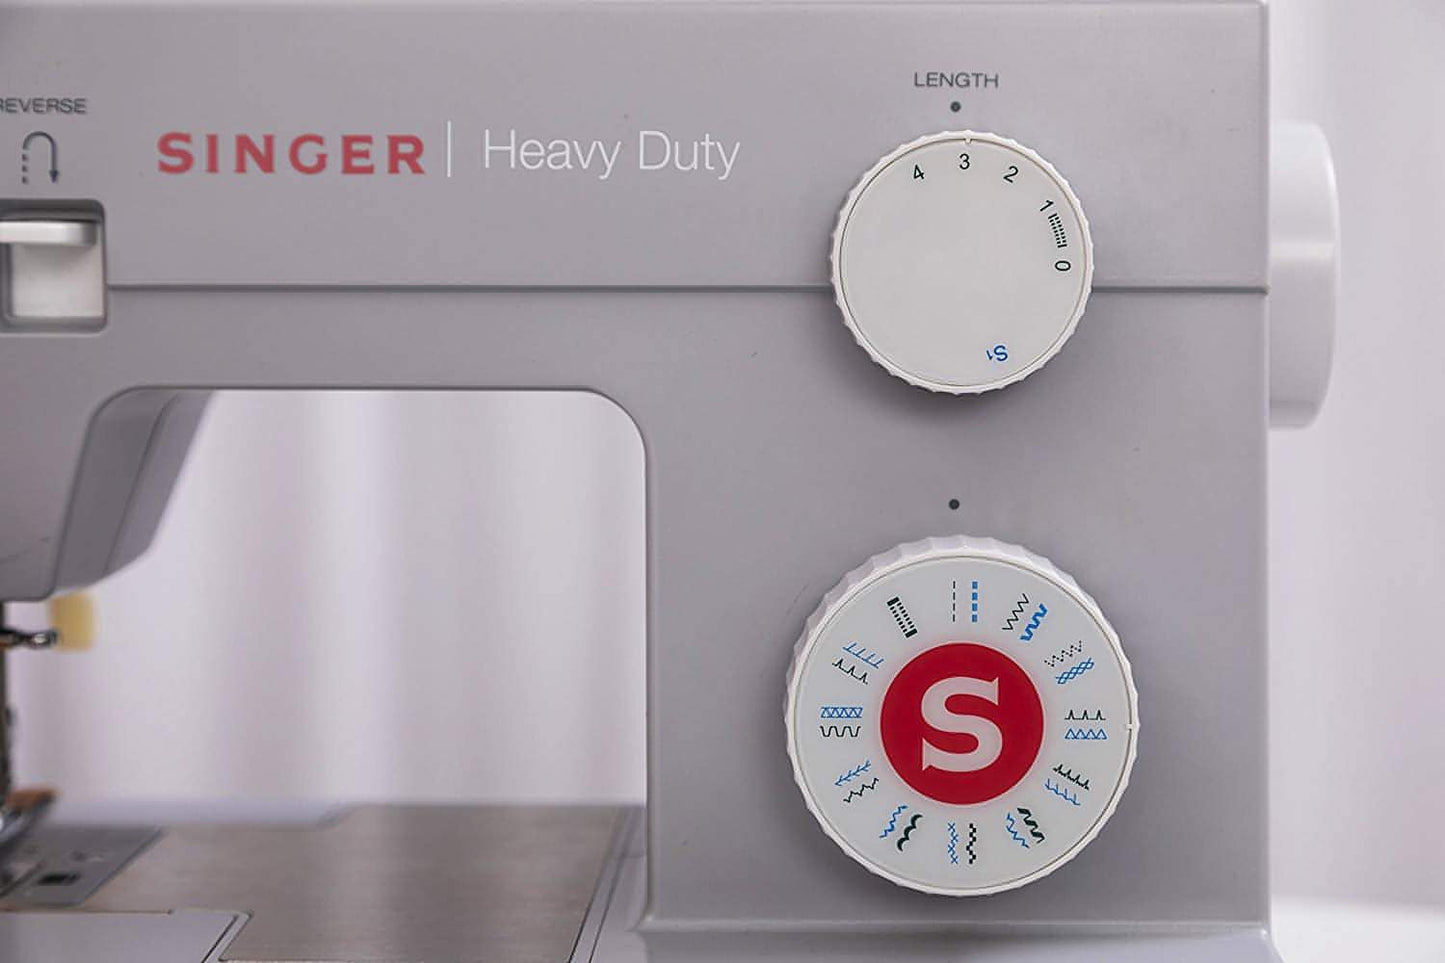 Singer Heavy Duty 4423 Grey - 60% stronger - Ex Display B grade (may have signs of use or cosmetic marks) Ex Display